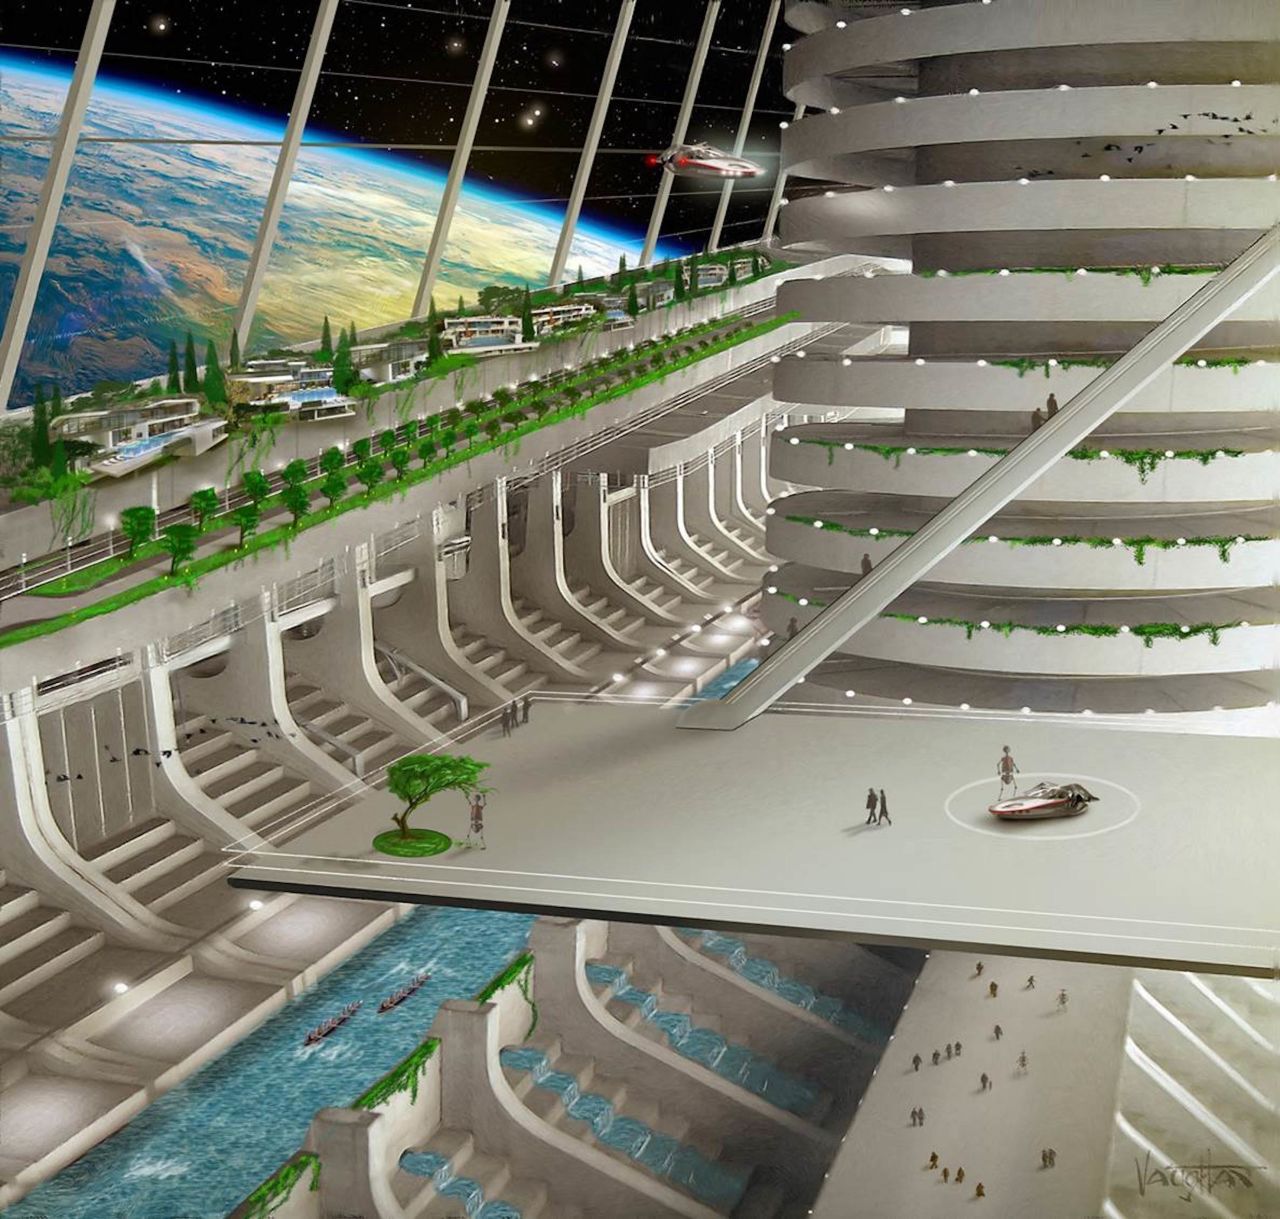 A rendering of a habitable platform, which Asgardia envisions sending its citizens to in future.